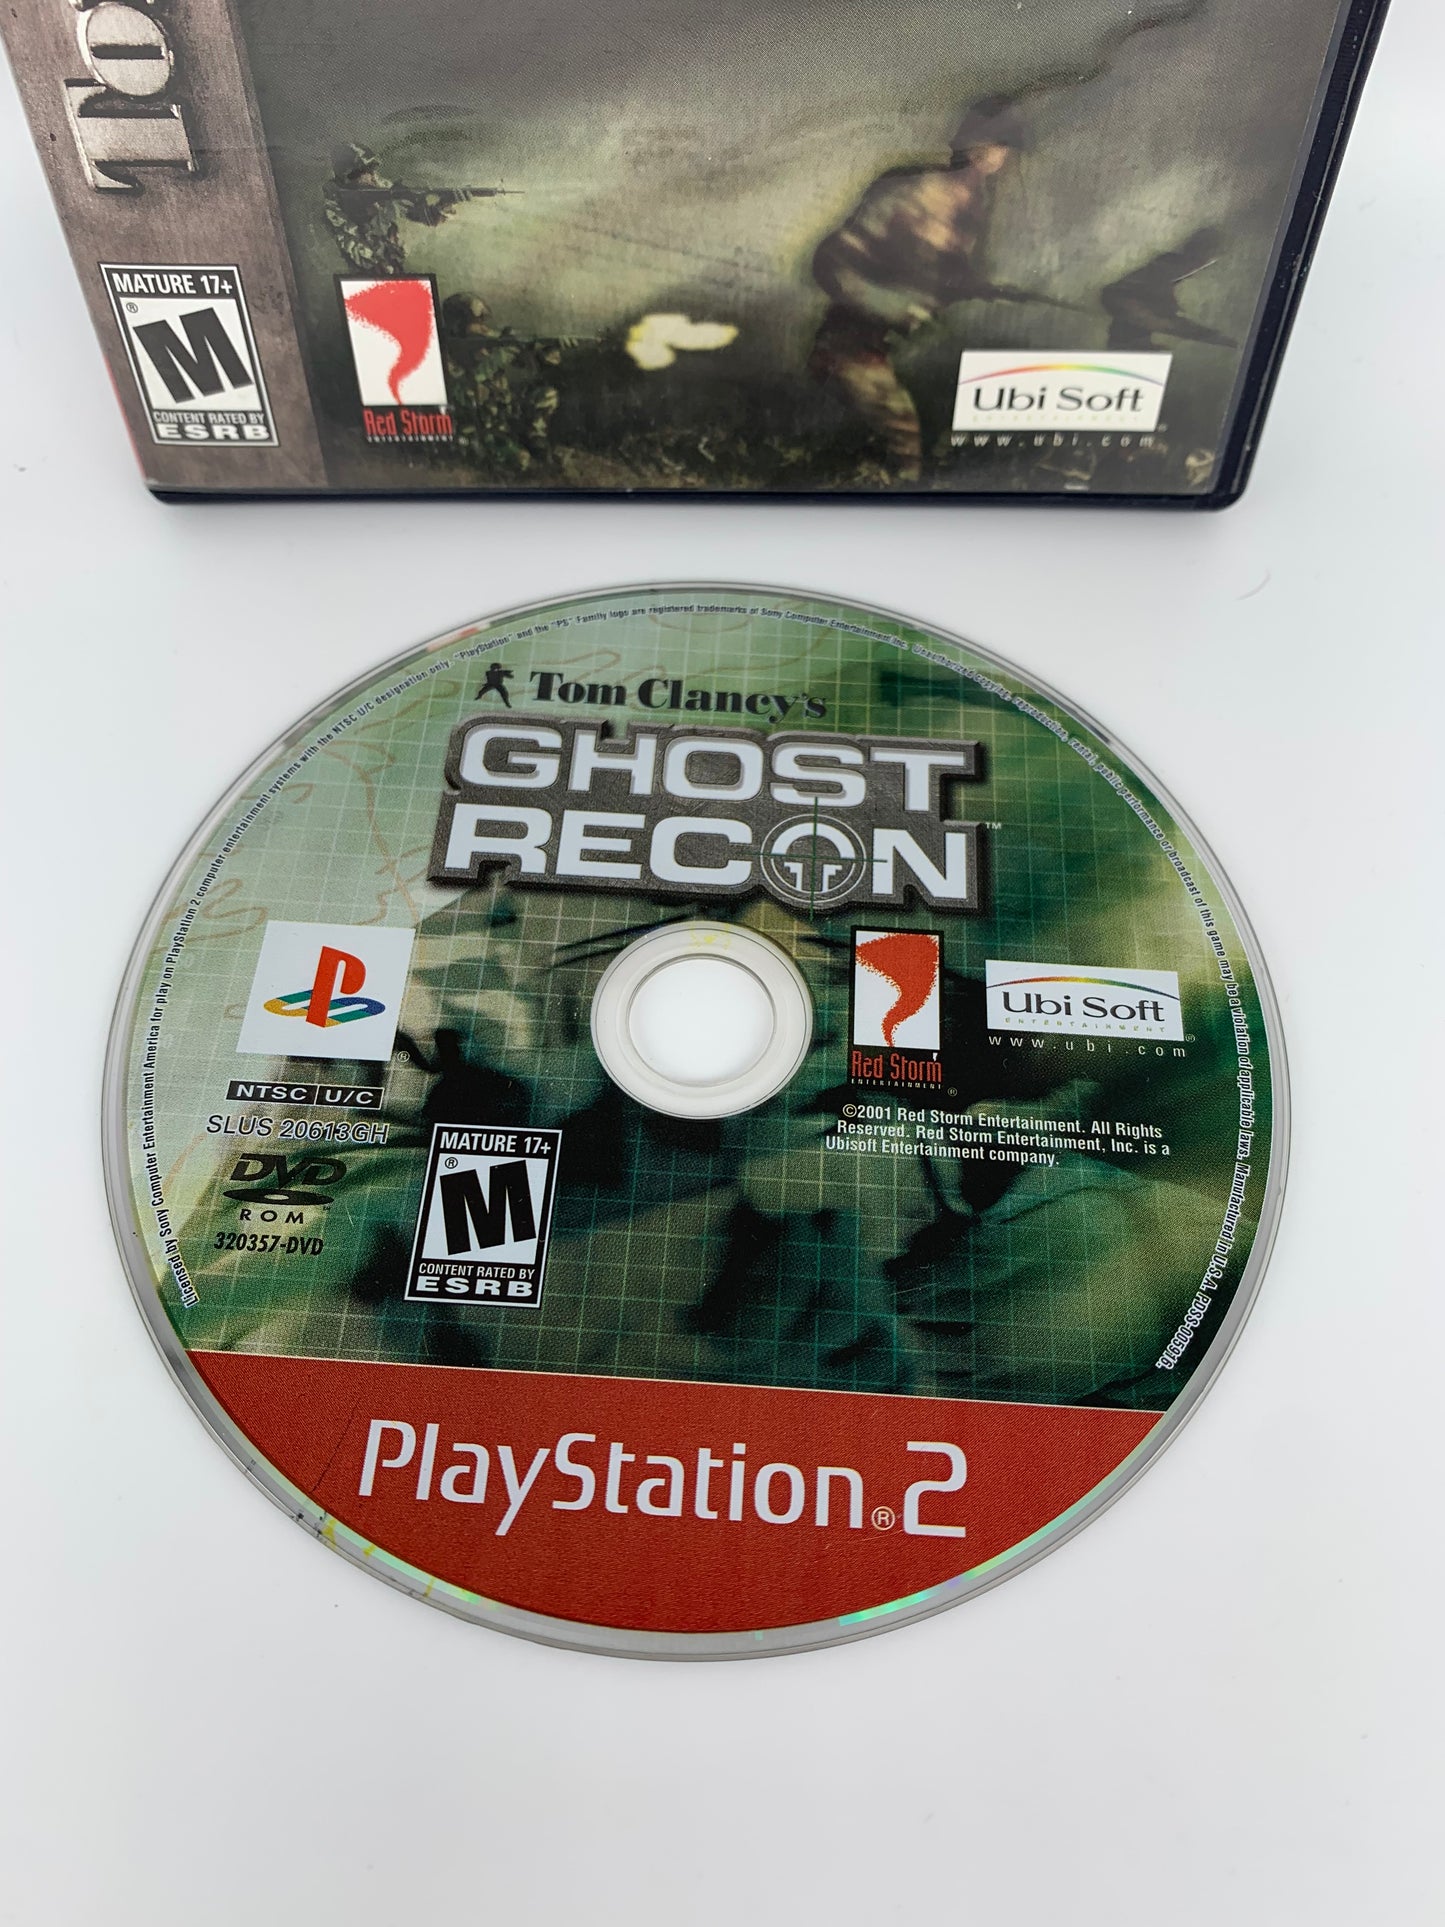 SONY PLAYSTATiON 2 [PS2] | TOM CLANCYS GHOST RECON | GREATEST HiTS